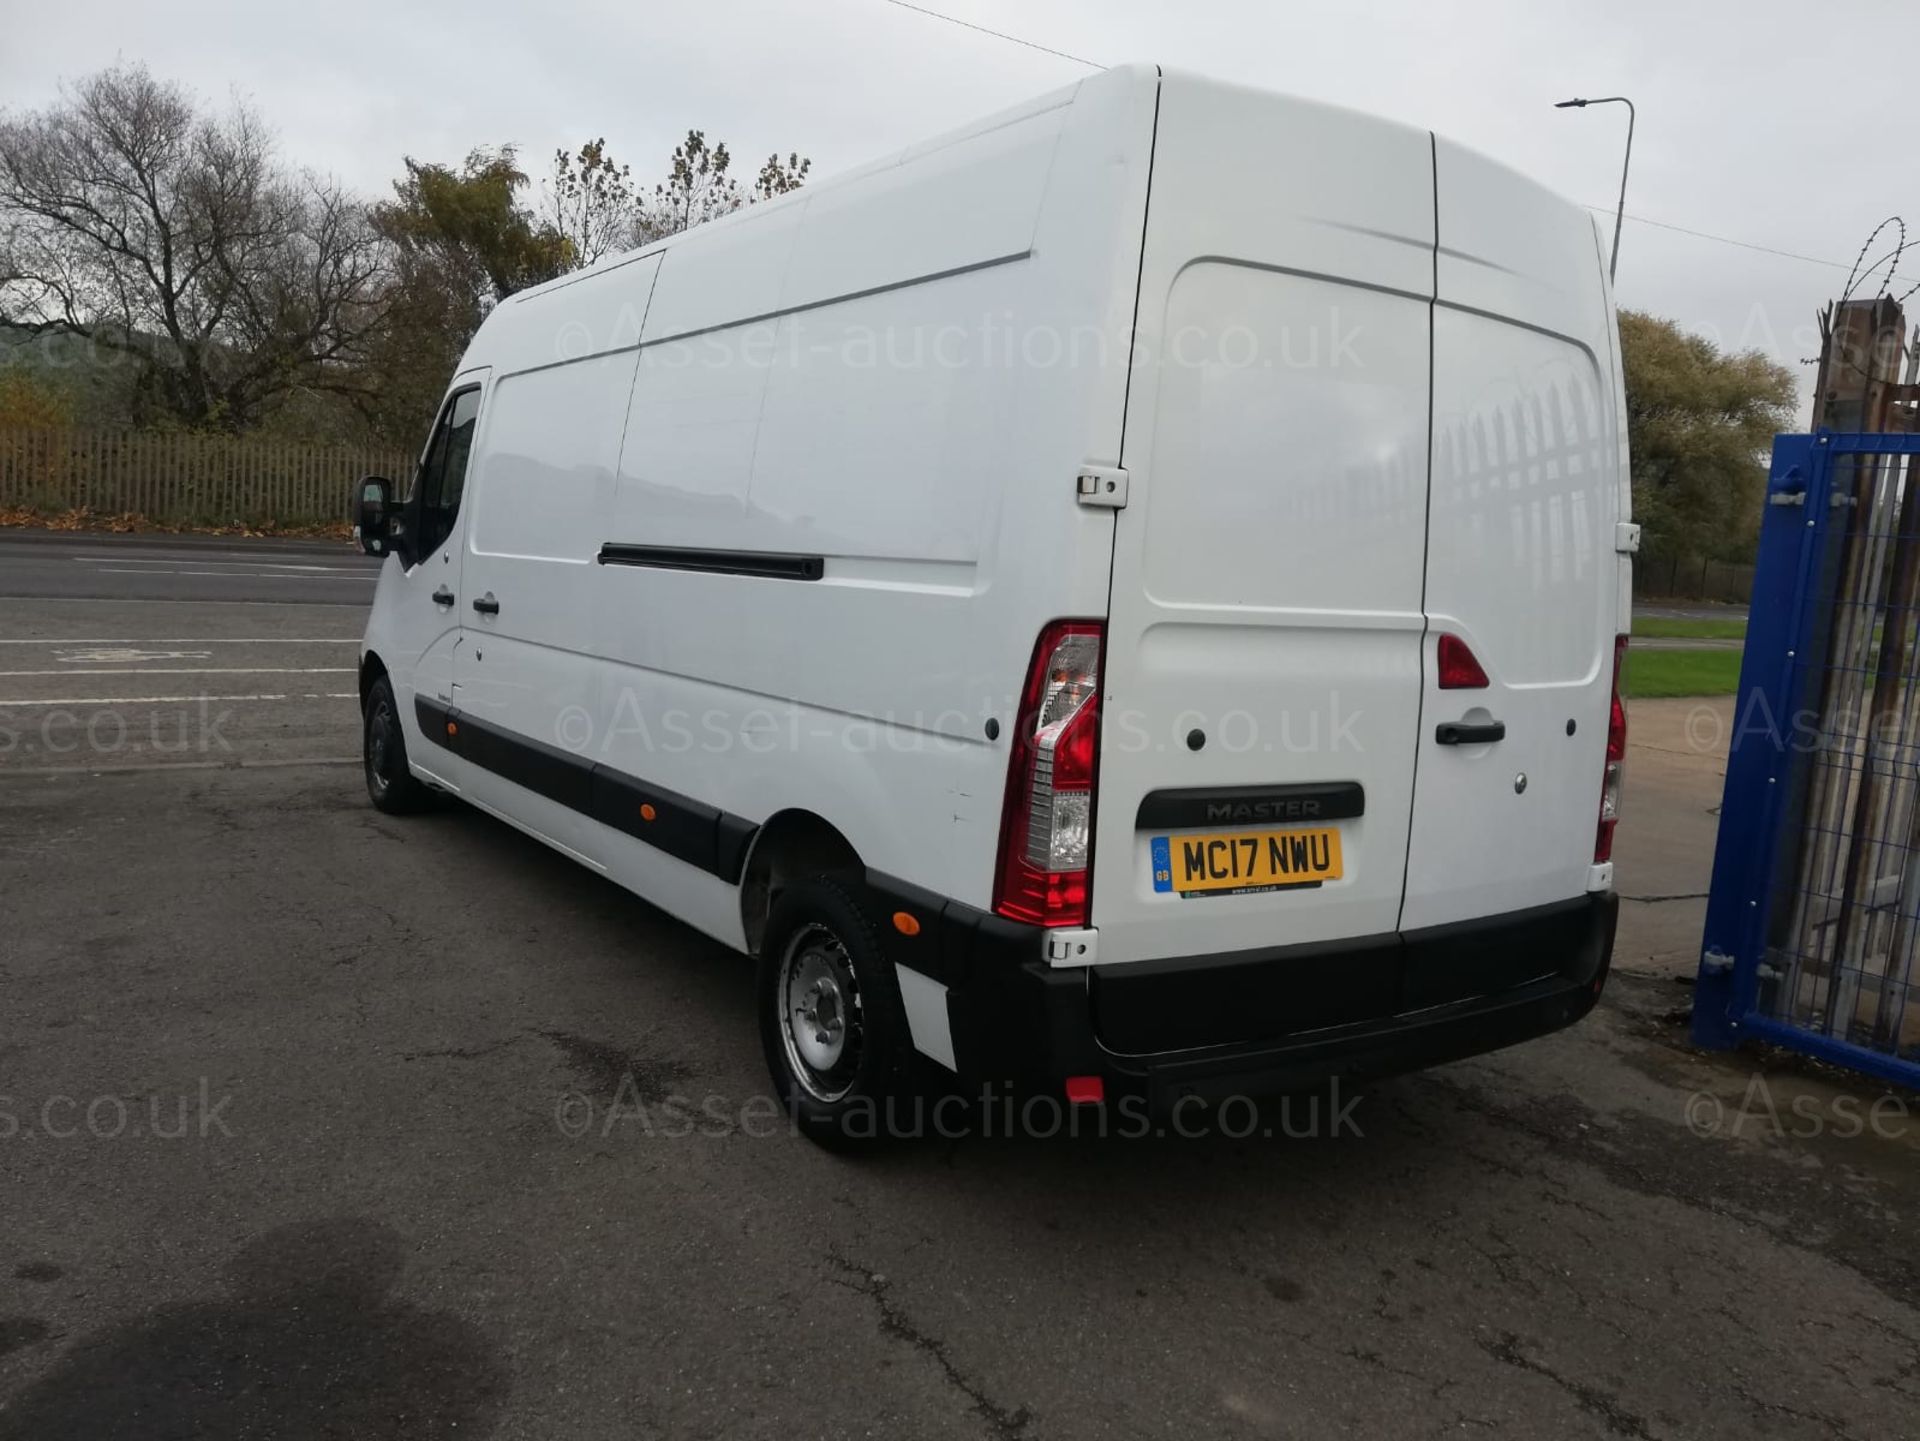 2017/17 RENAULT MASTER LM35 BUSINESS DCI L3H2 WHITE PANEL VAN, 106K MILES WITH SERVICE HISTORY - Image 5 of 9